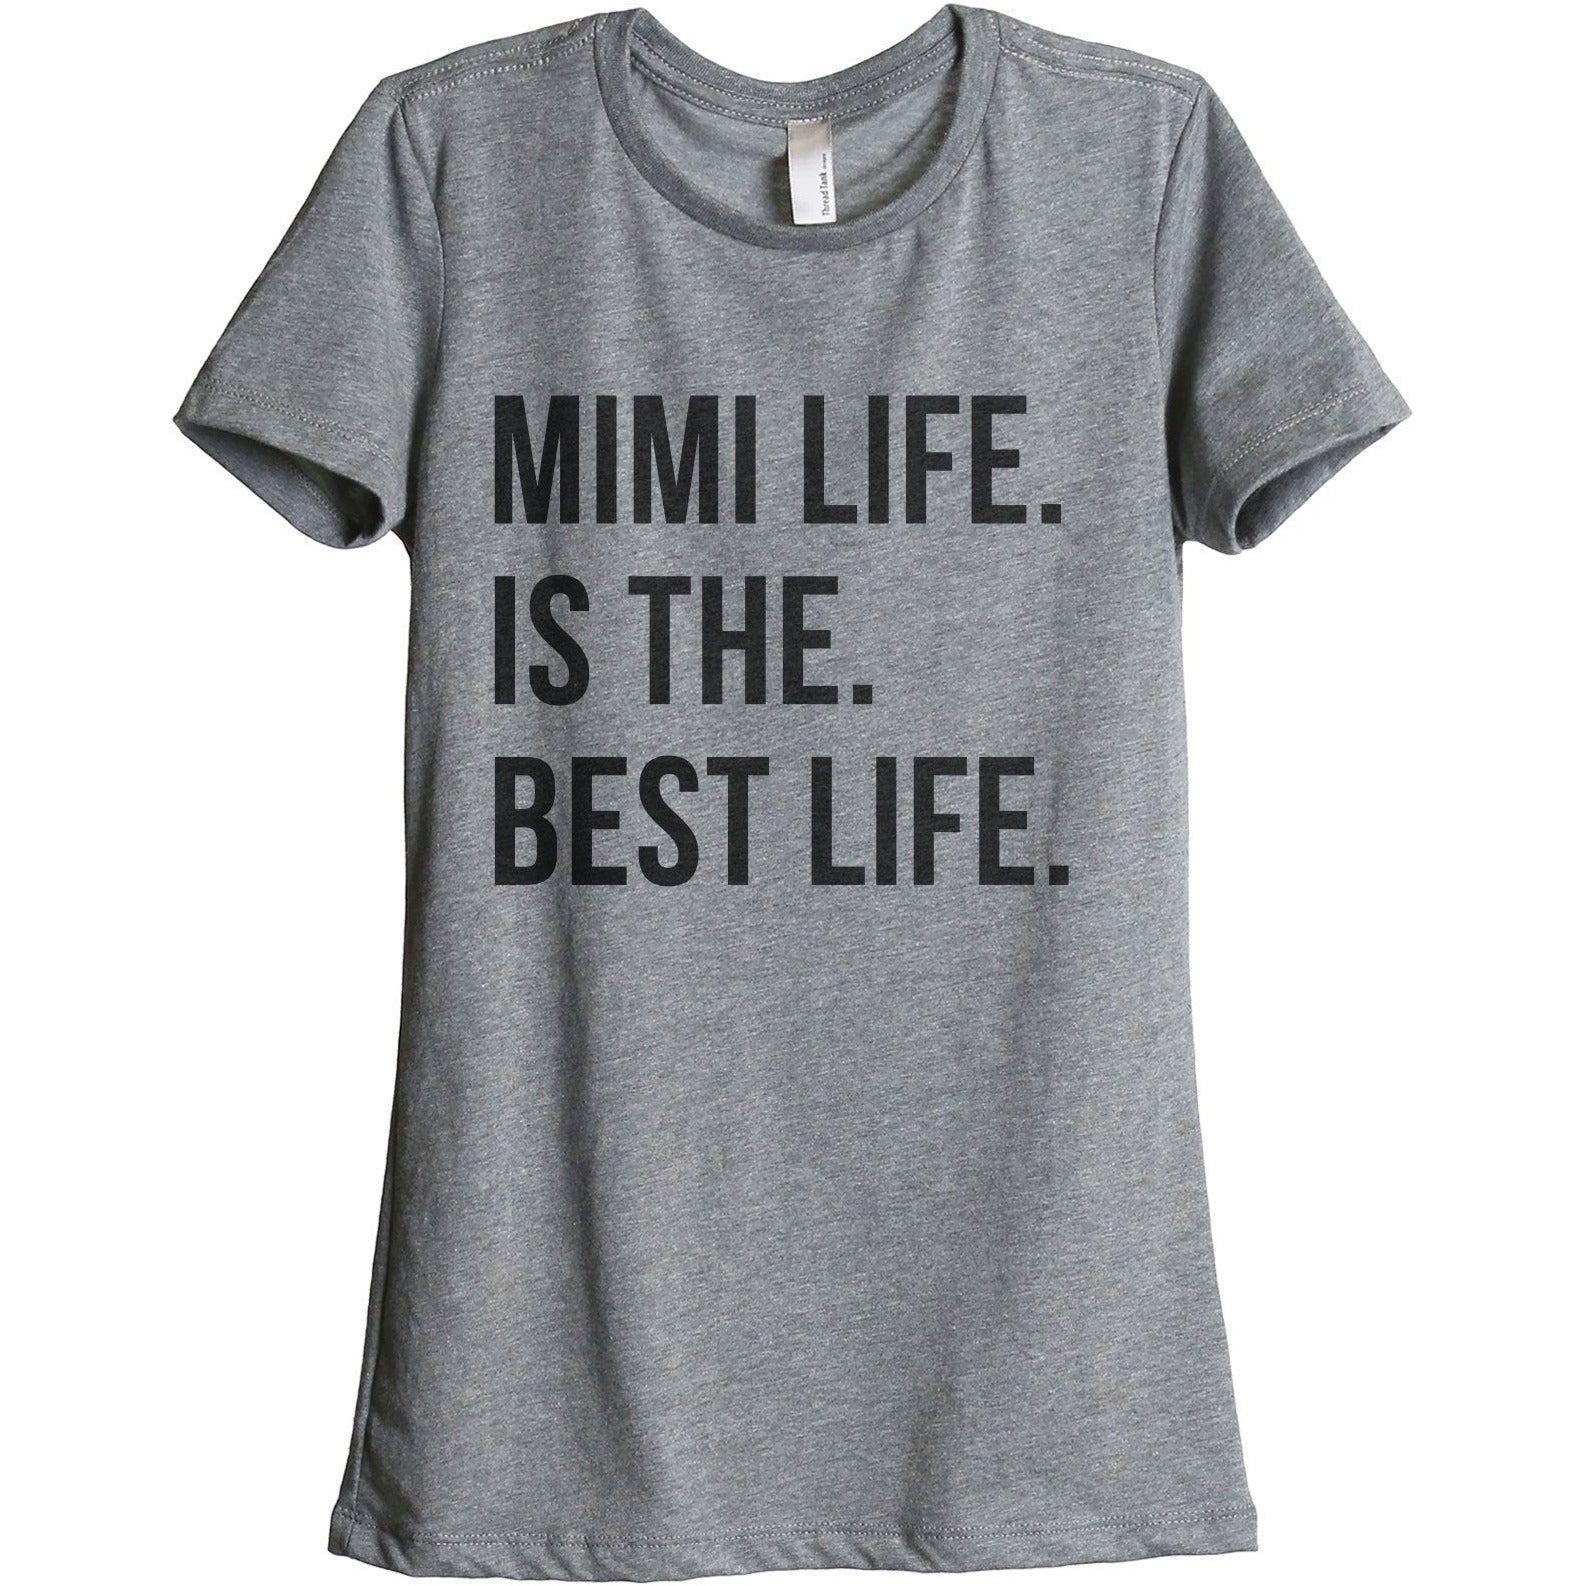 Mimi Life Is The Best Life